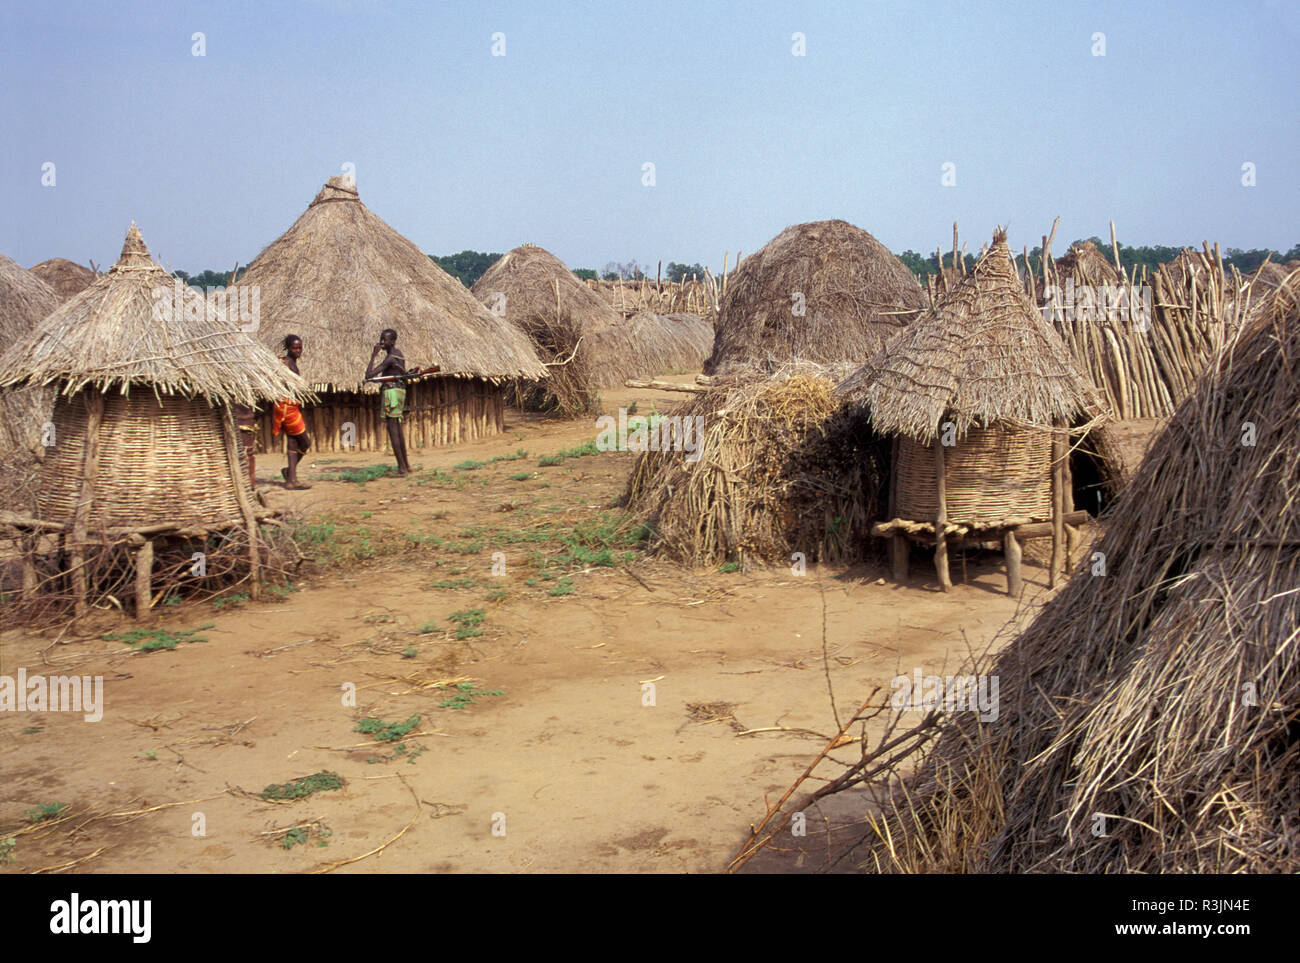 Africa, Ethiopia, Omo region. Two guys with guns standing among thatched buildings in Doose (Dooze), the largest of the Karo tribe villages. Stock Photo